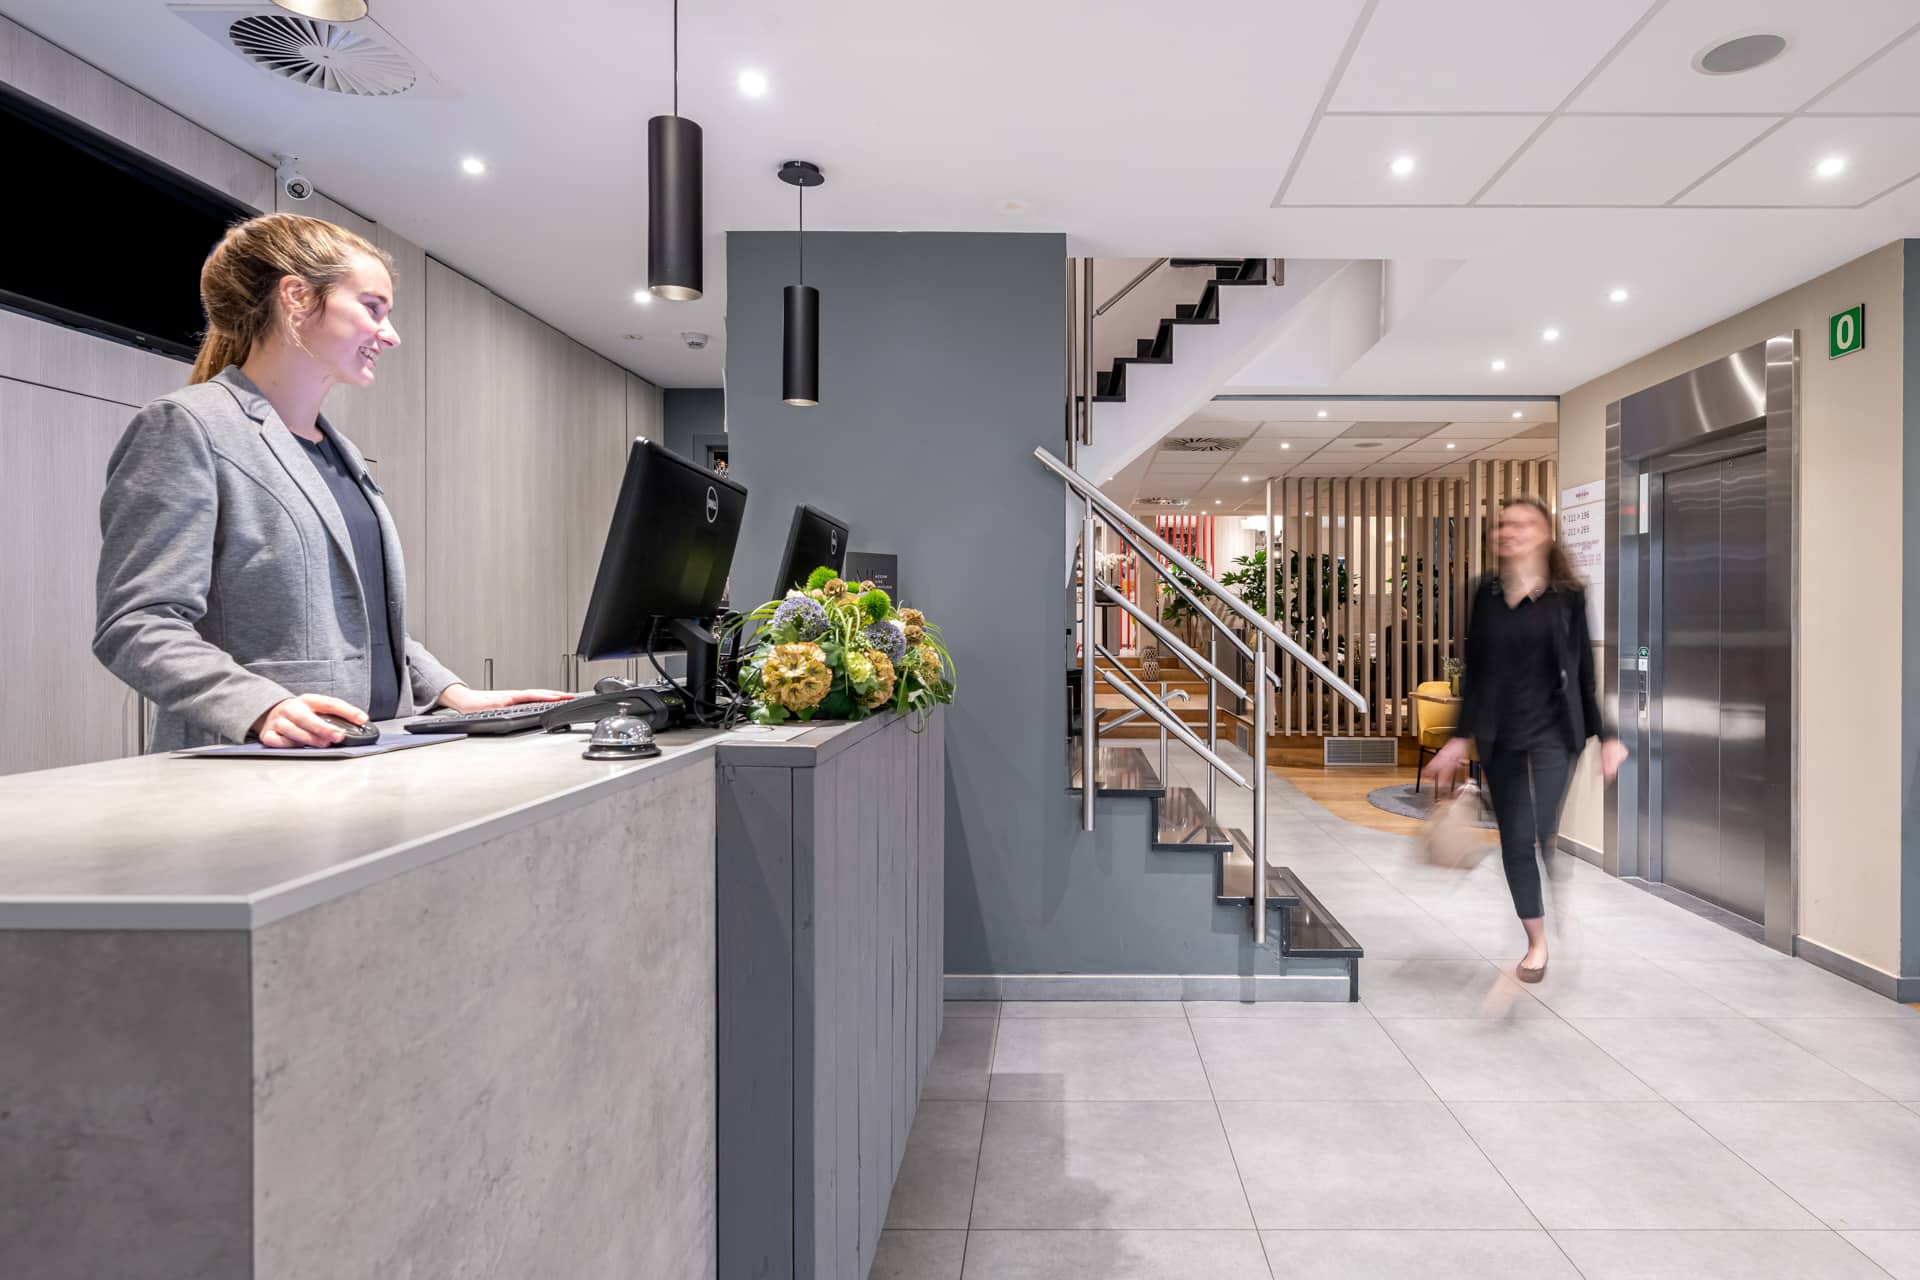 Mercure Oostende Guest Checking at Reception Desk